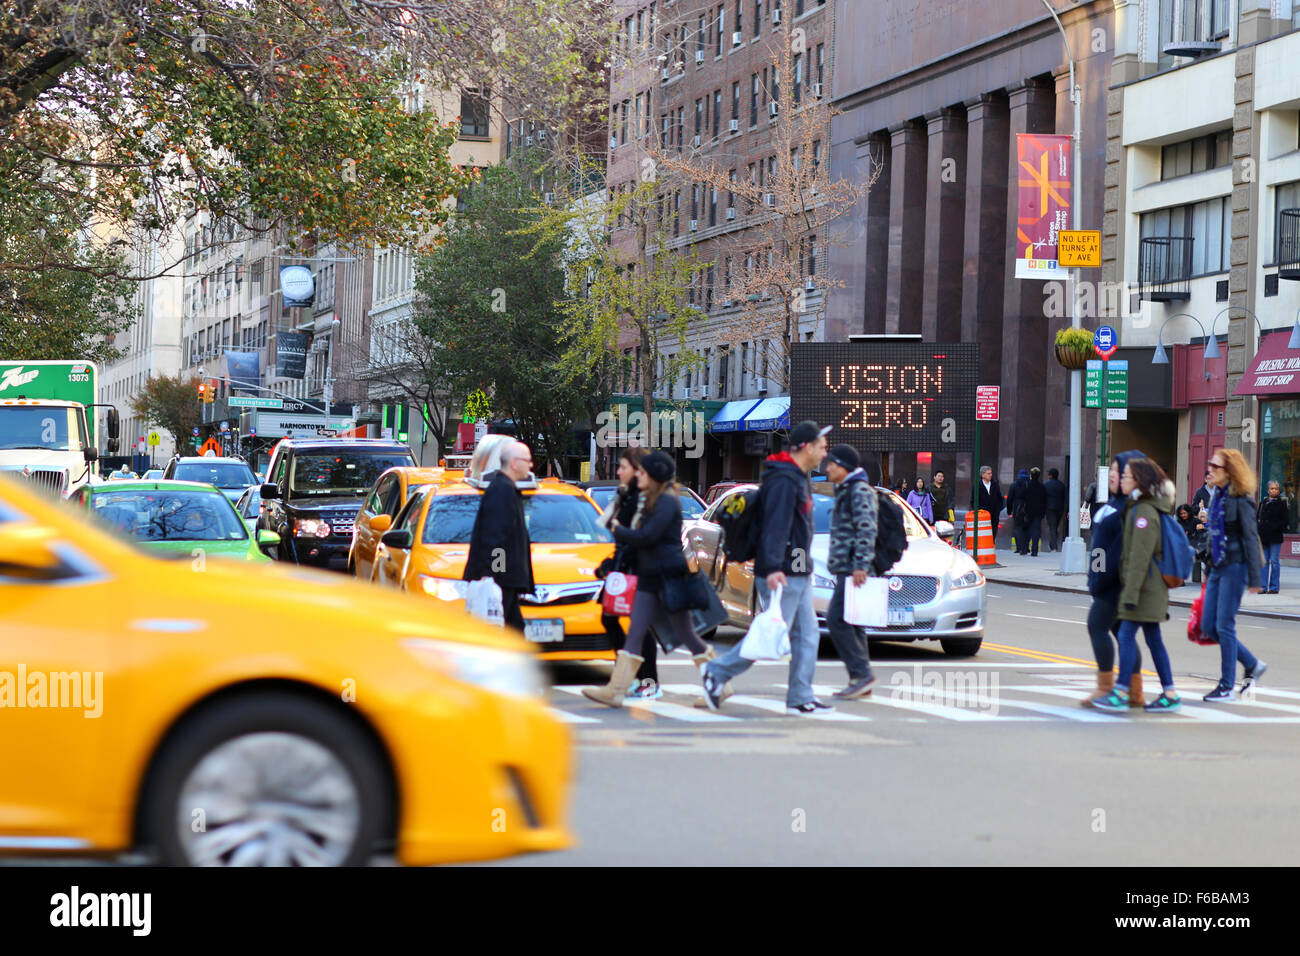 An electronic sign flashes Vision Zero near a New York City intersection Stock Photo